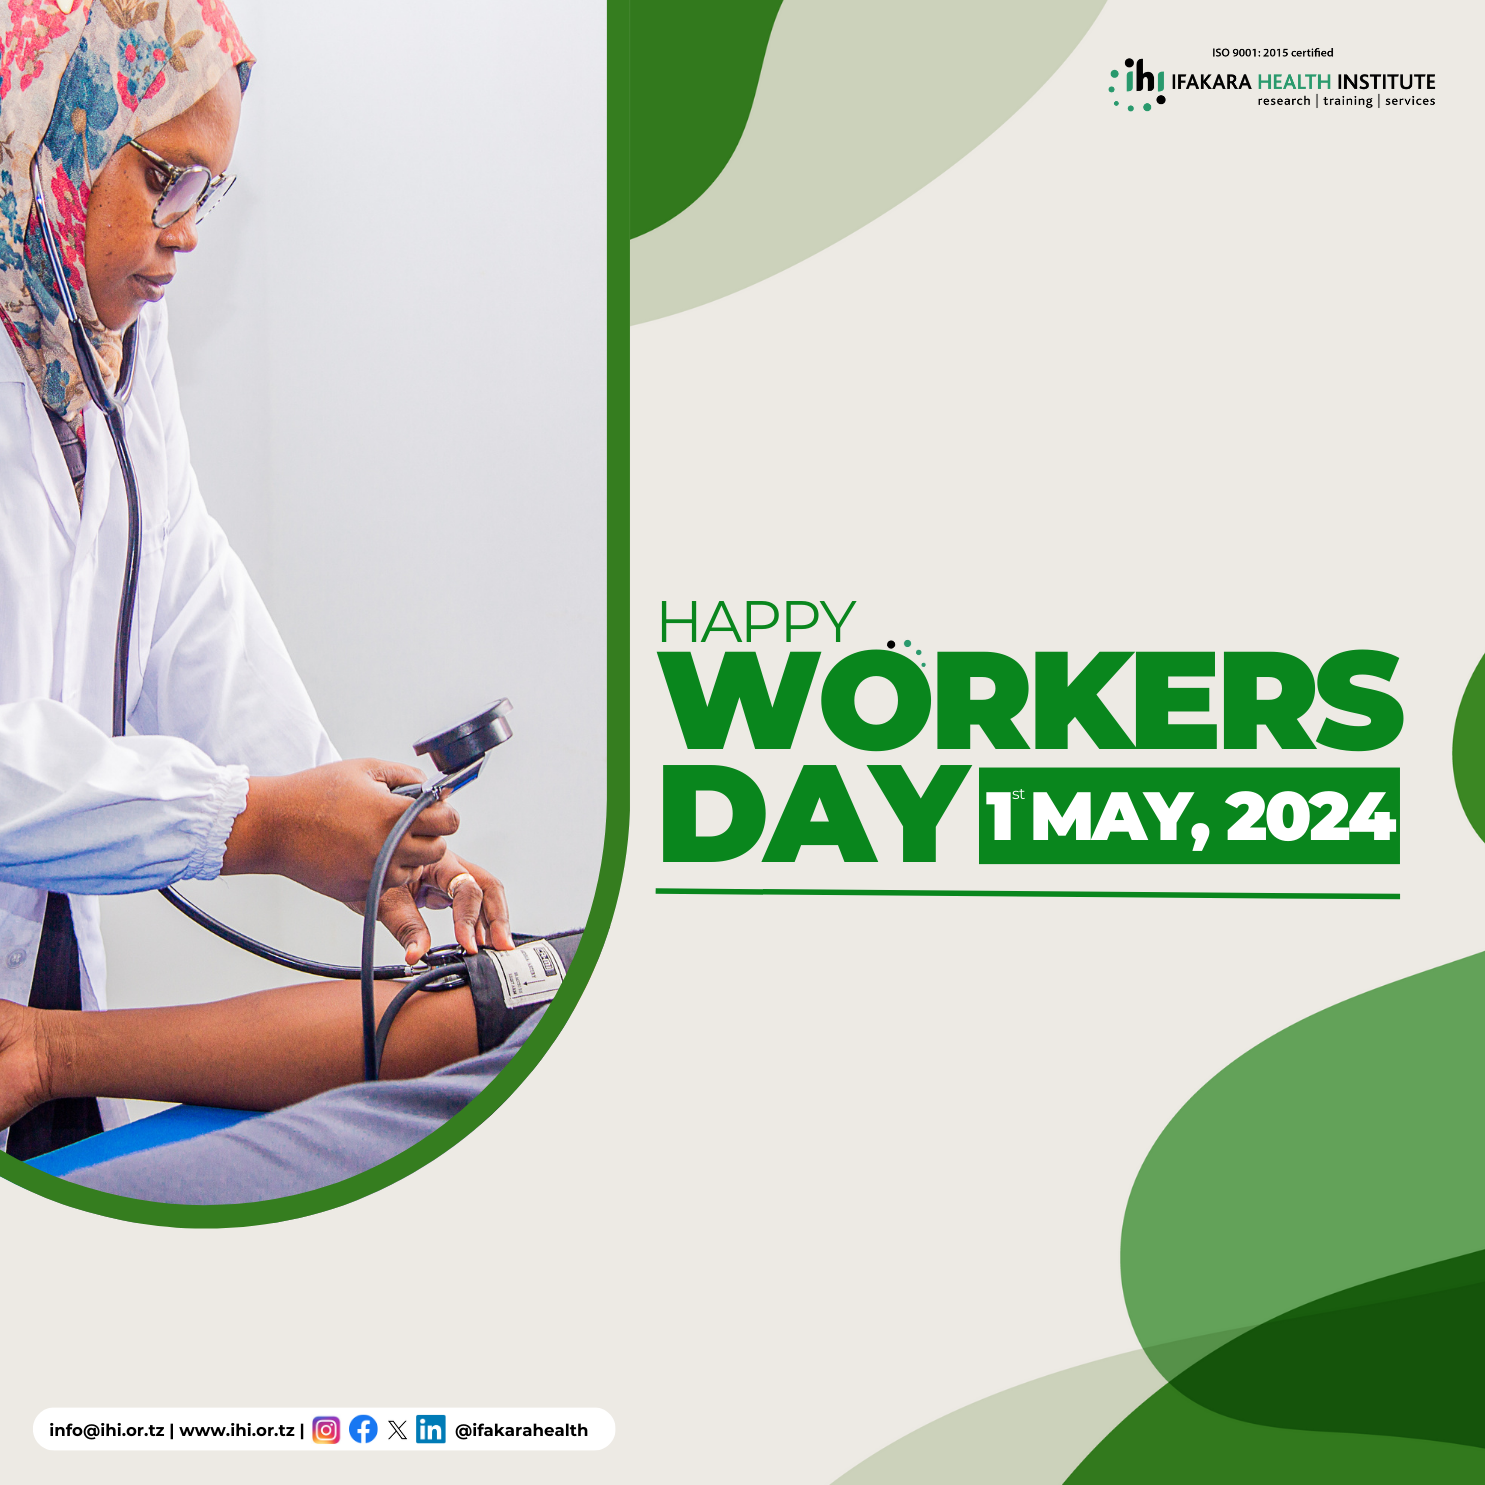 COMMEMORATION: Happy Workers Day!